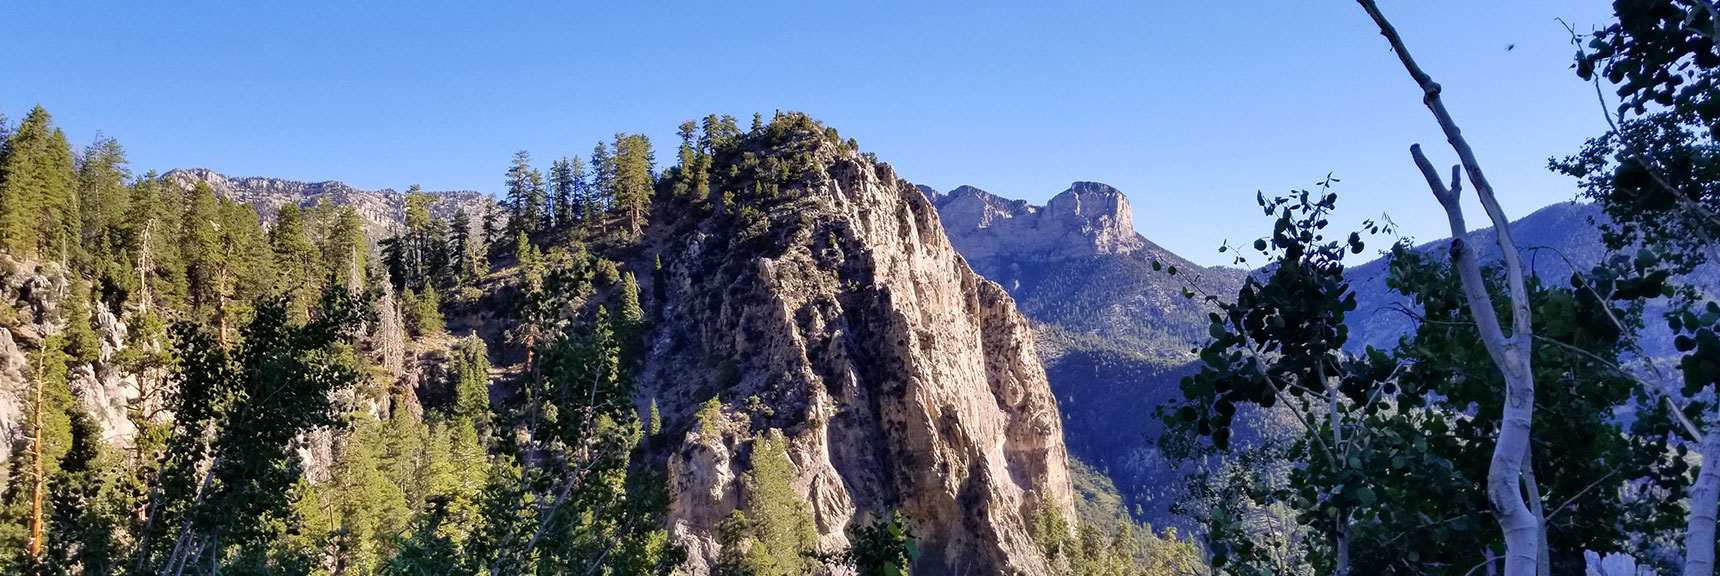 Cathedral Rock Viewed from Behind (South), Mt. Charleston Wilderness, Nevada